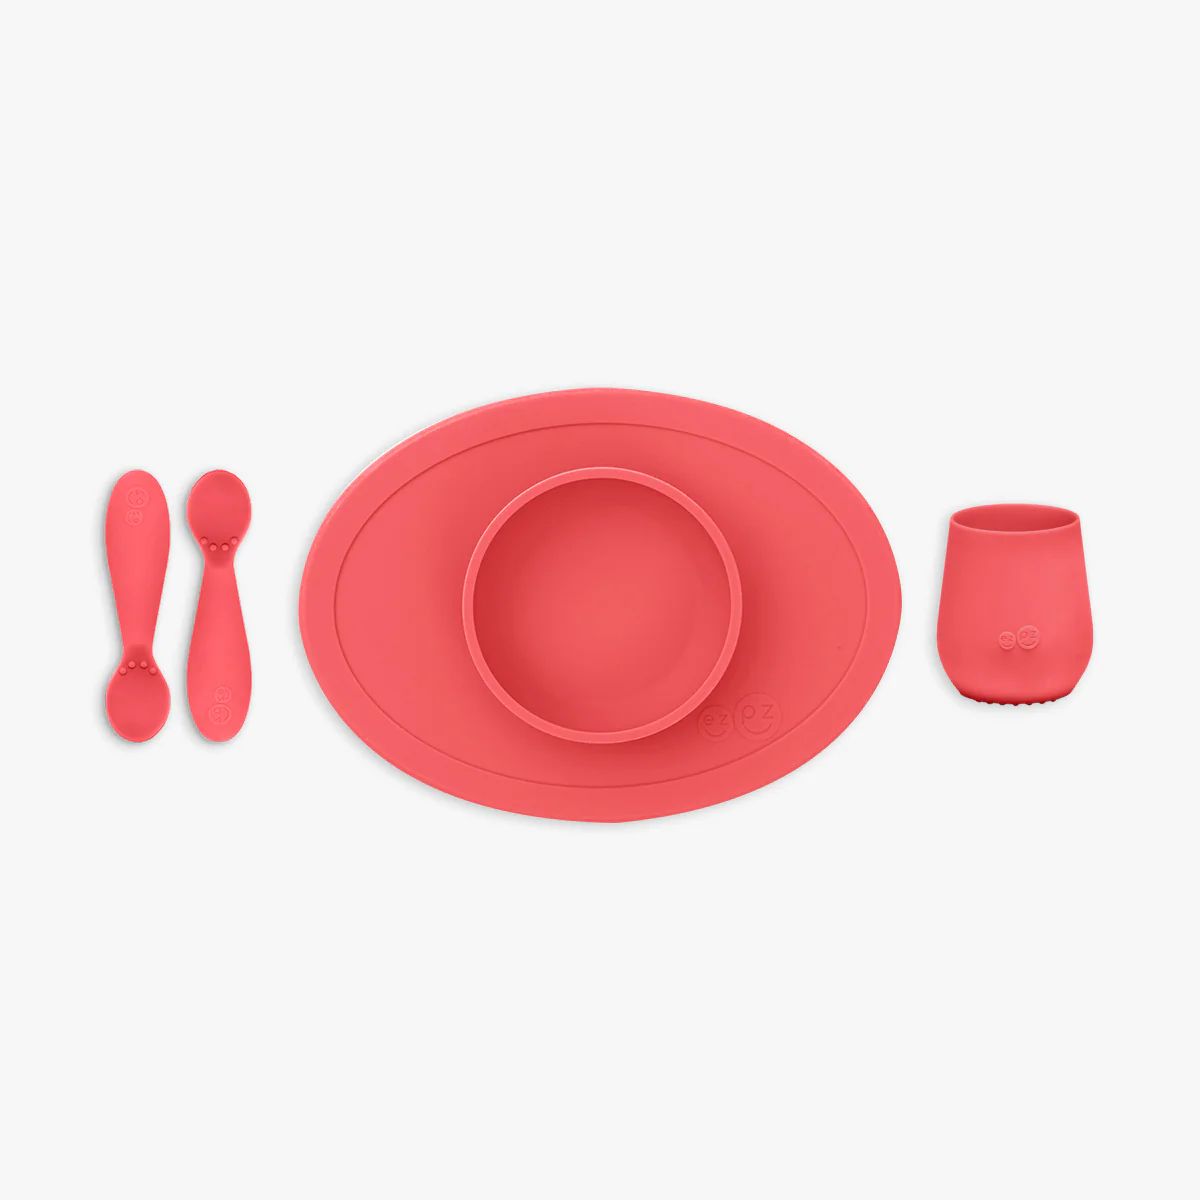 First Foods Set / Silicone Spoon, Cup & Suctioning Bowl for Infants | ezpz